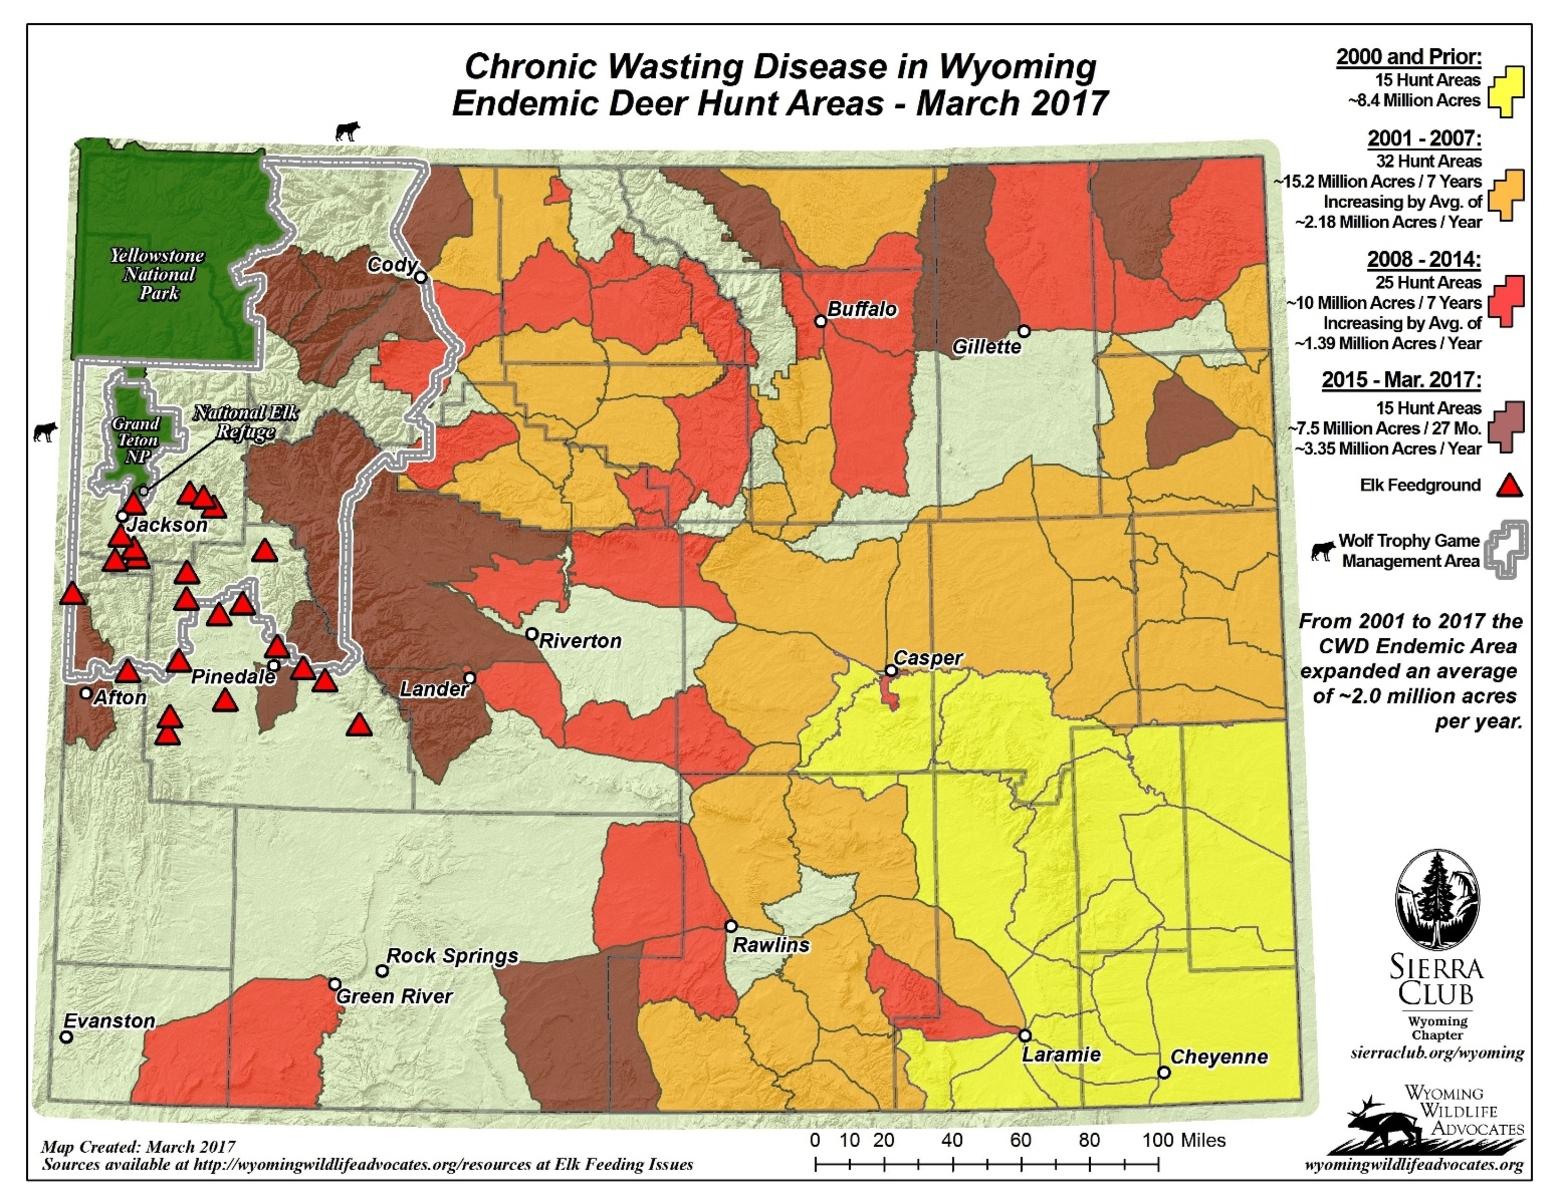 CWD was first diagnosed in southeastern Wyoming (marked in yellow) and over the last three decades has expanded in deer herds.  The disease is now bearing down on the Greater Yellowstone Ecosystem in the northwest corner of the state and  pressing up against the states of both Montana and Idaho.  The location of Wyoming's 22 elk feedgrounds are marked by red triangles.  The National Elk Refuge is located just south of Yellowstone National Park and east of Grand Teton National Park. Map courtesy Wyoming Chapter of the Sierra Club and Wyoming Wildlife Advocates